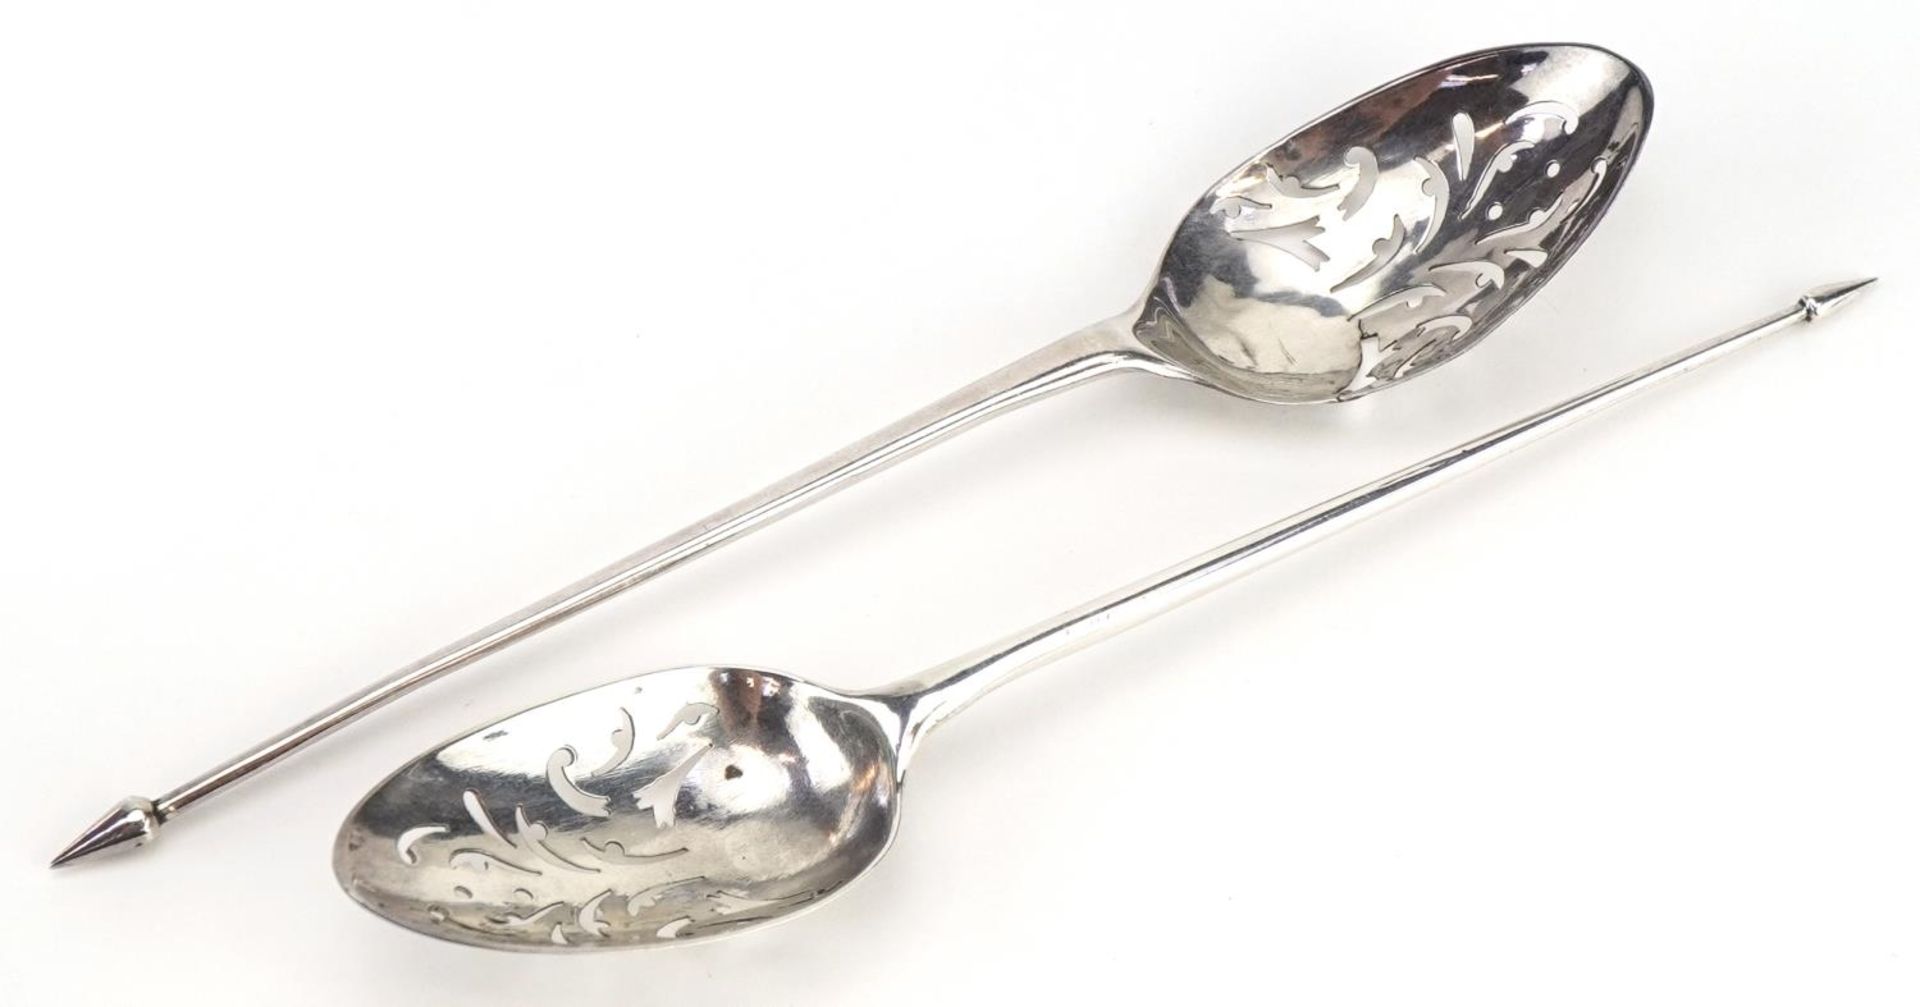 Two 18th century silver mote spoons, each with pierced scroll decoration to the bowls, each